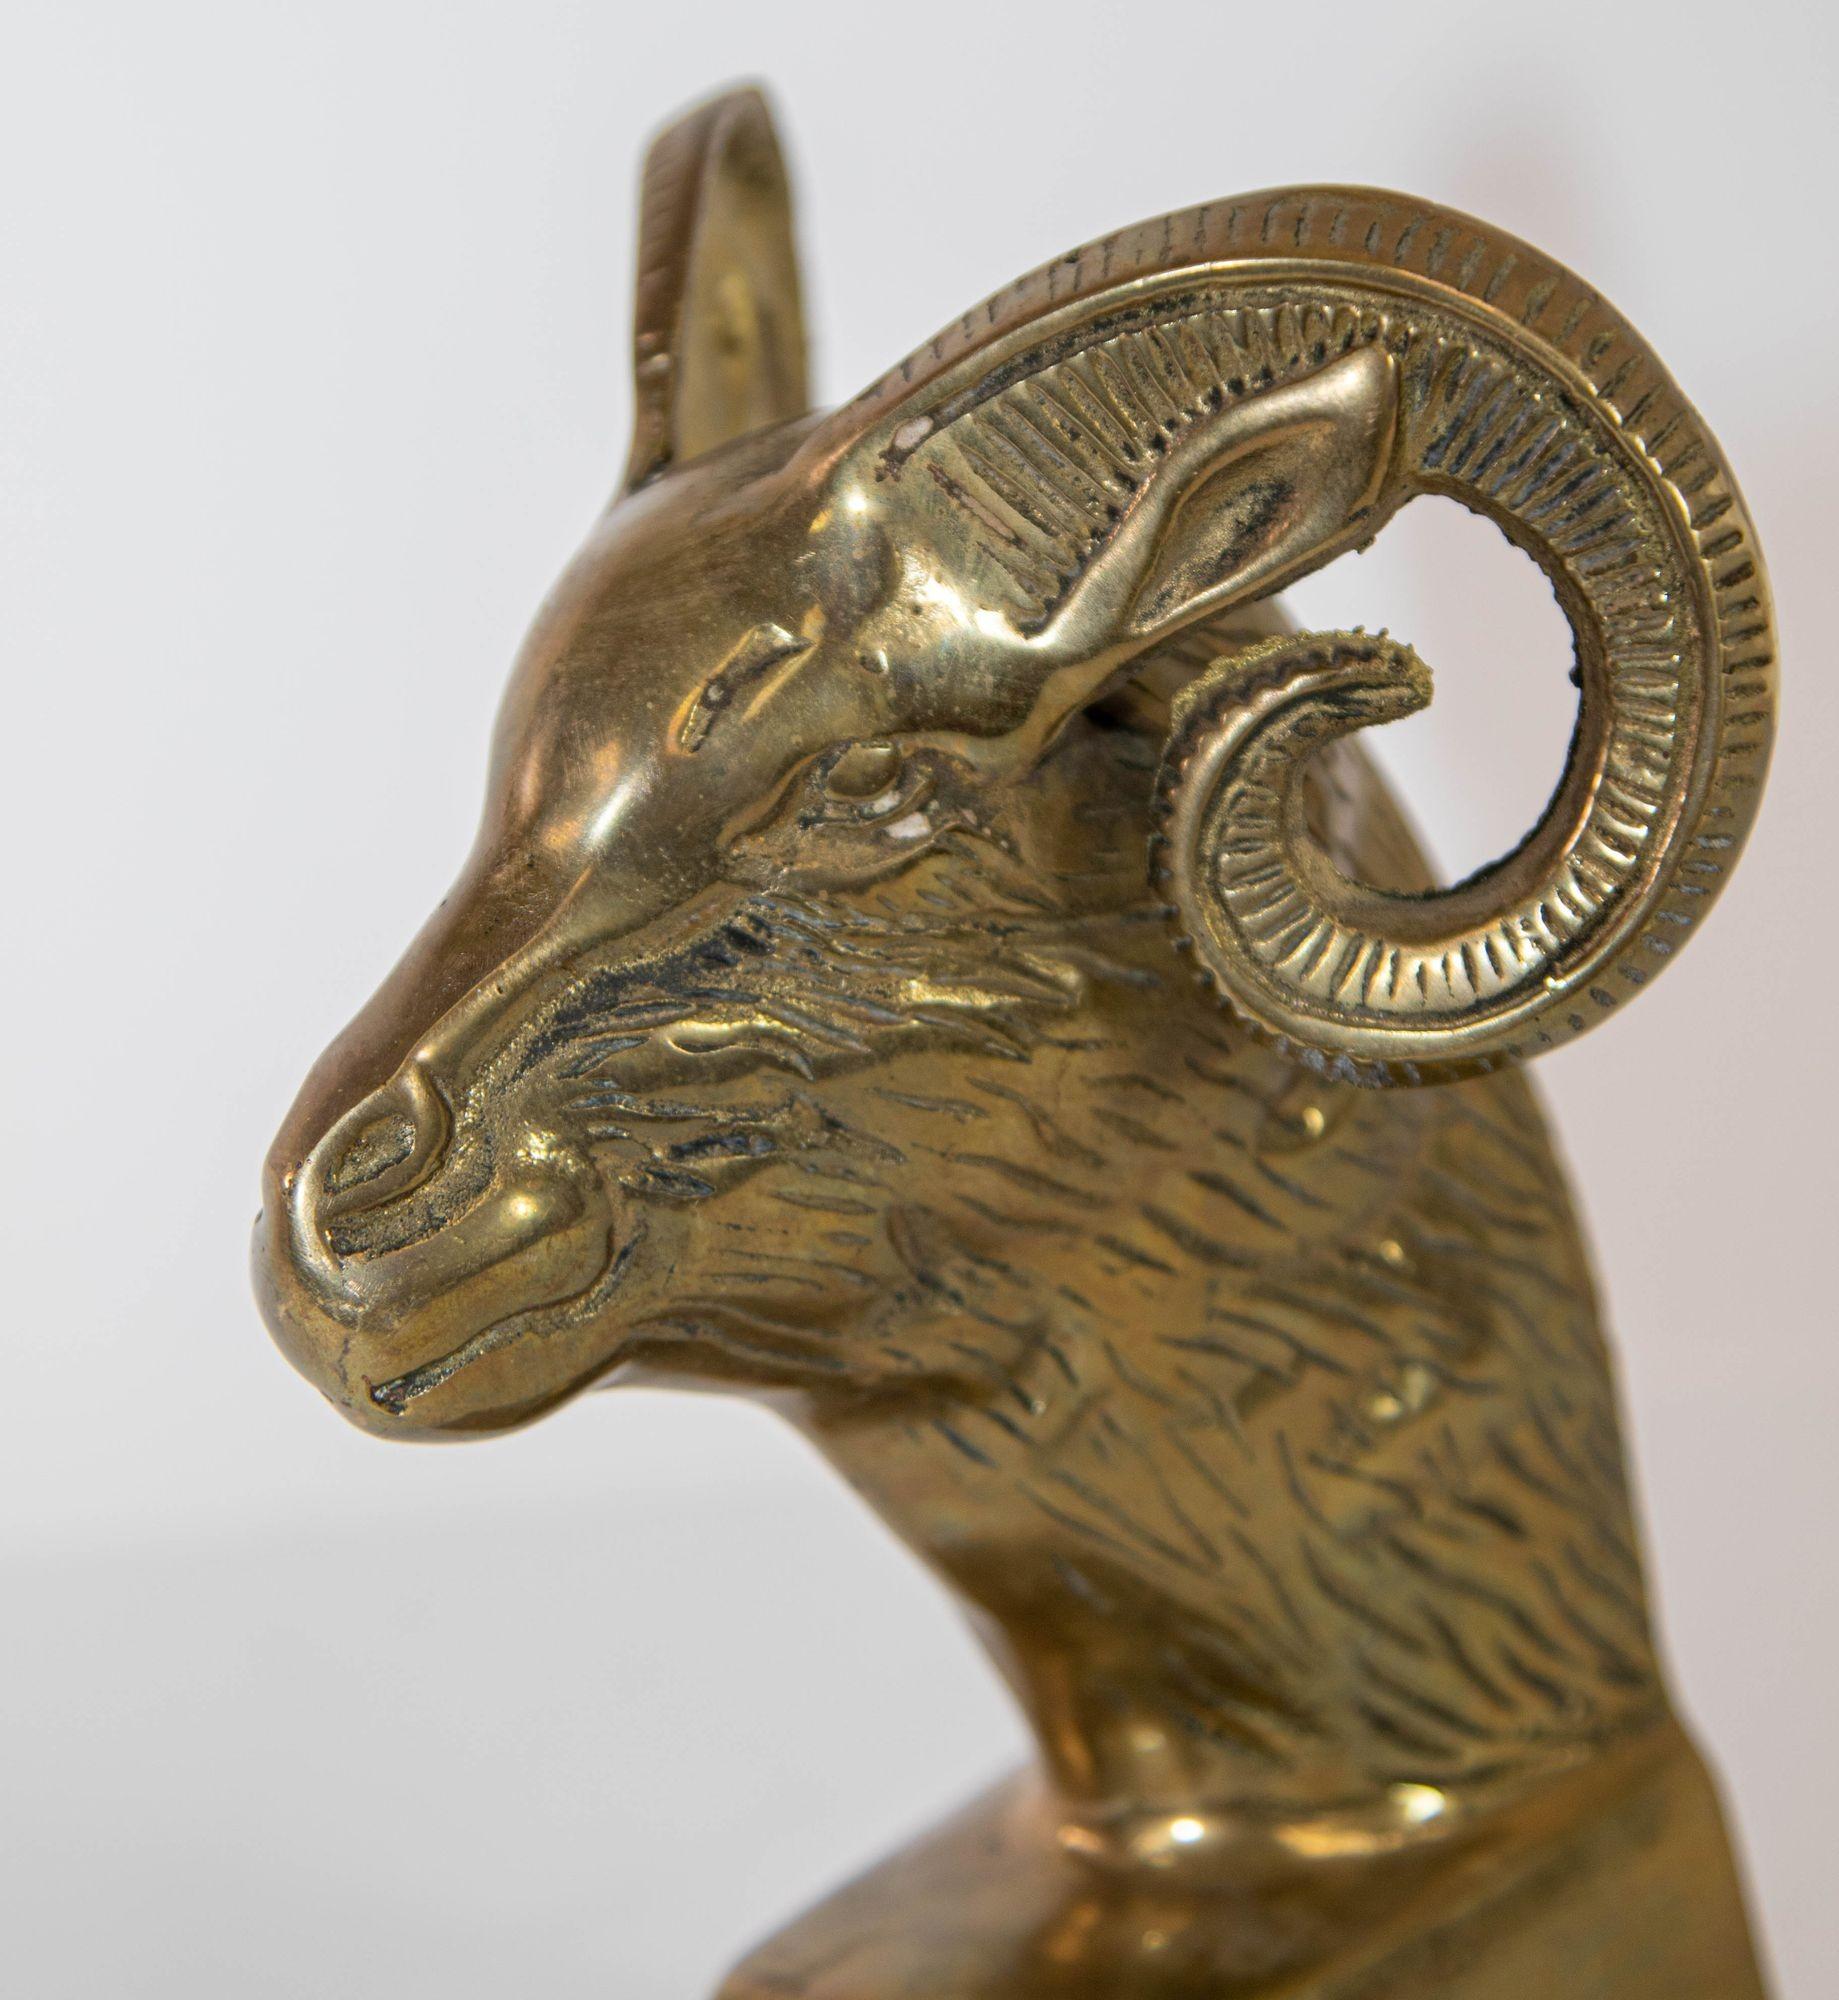 Vintage Brass Ram Paperweight Bookend 1950s Art Deco Style In Good Condition For Sale In North Hollywood, CA